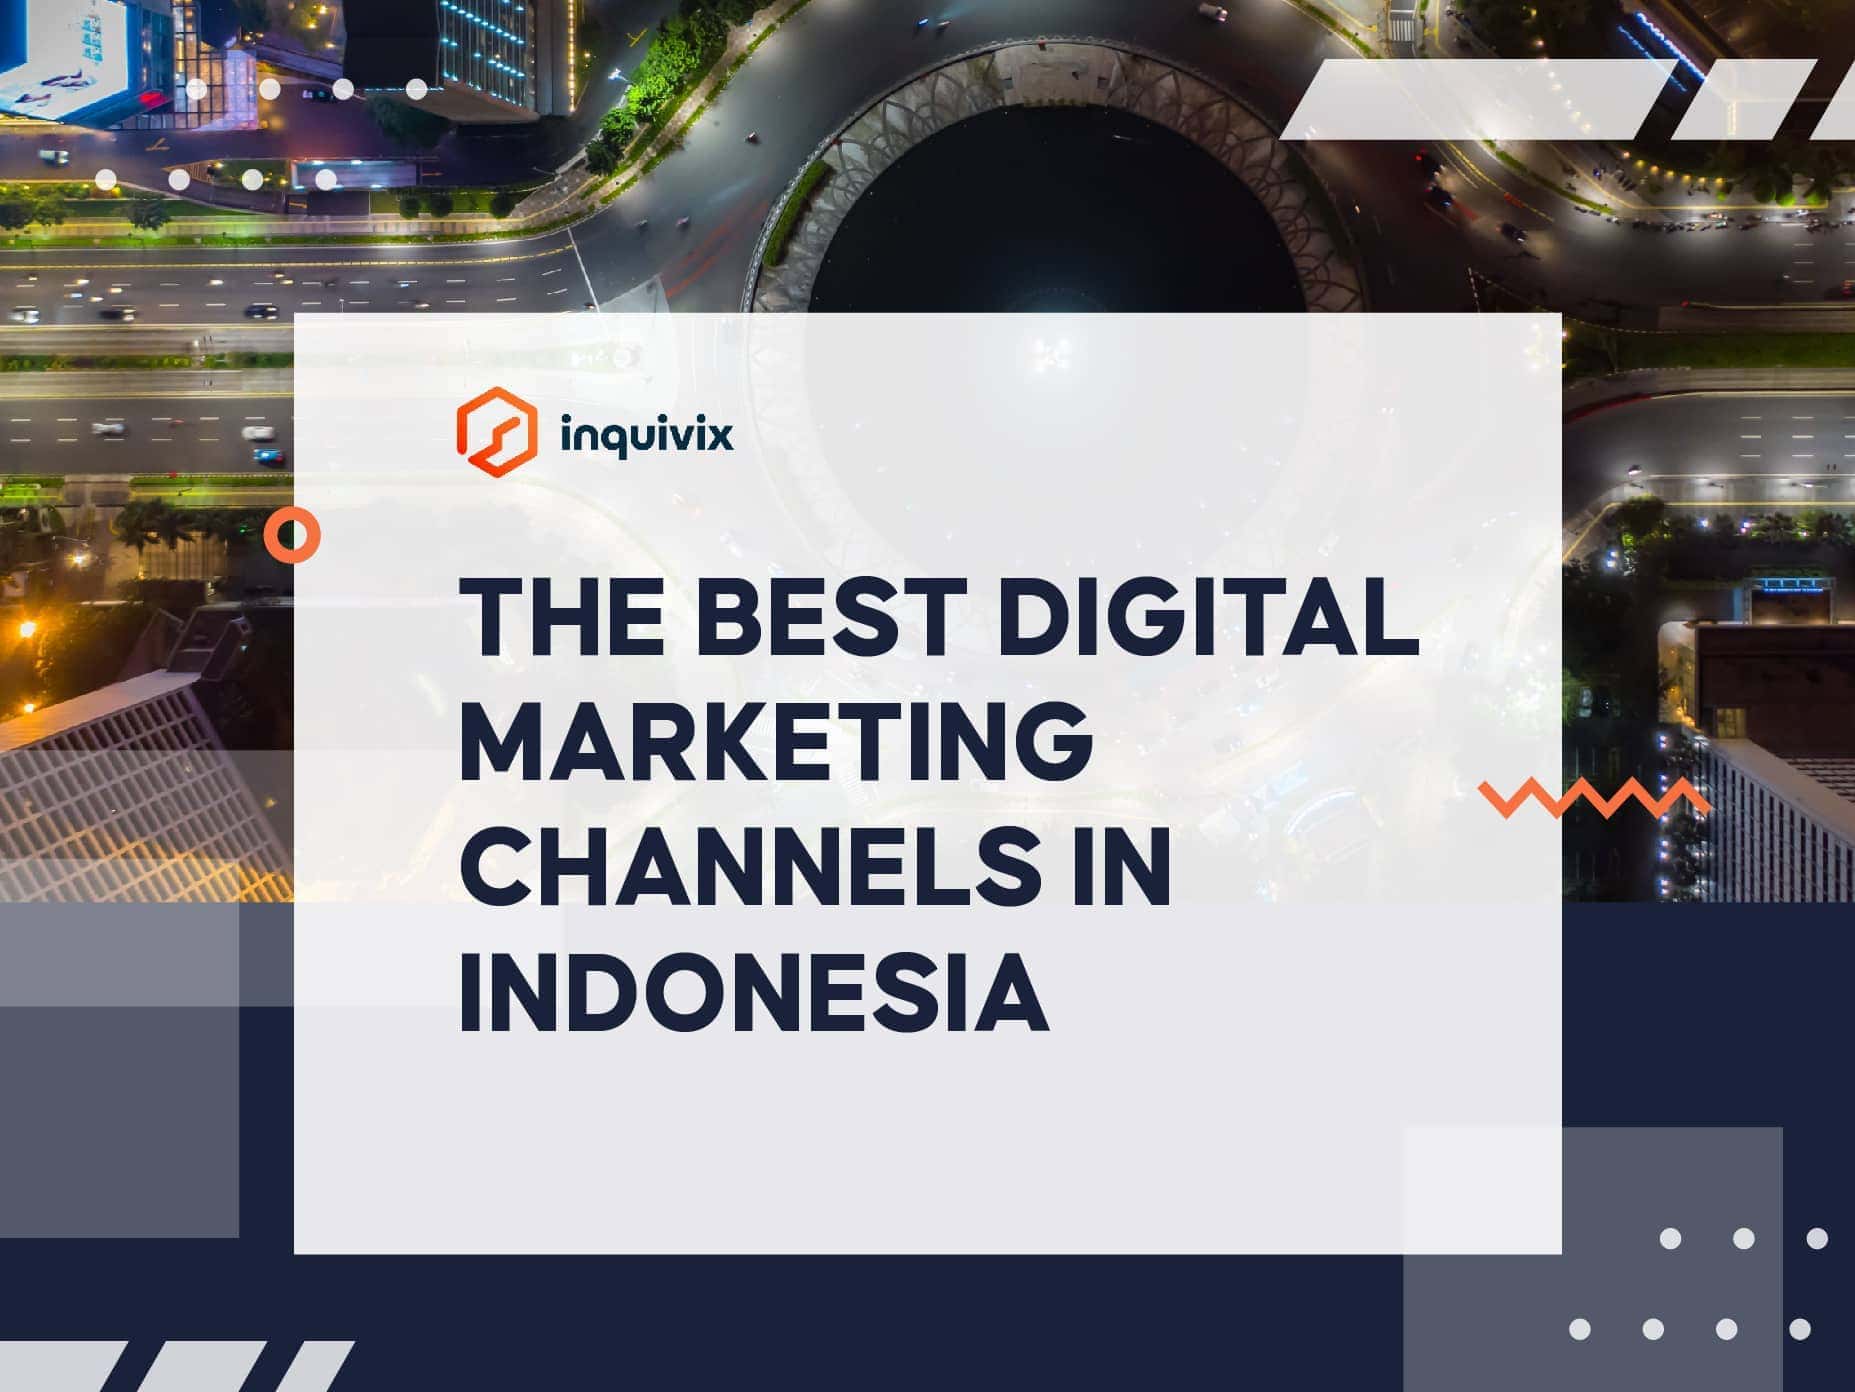 THE BEST DIGITAL MARKETING CHANNELS IN INDONESIA